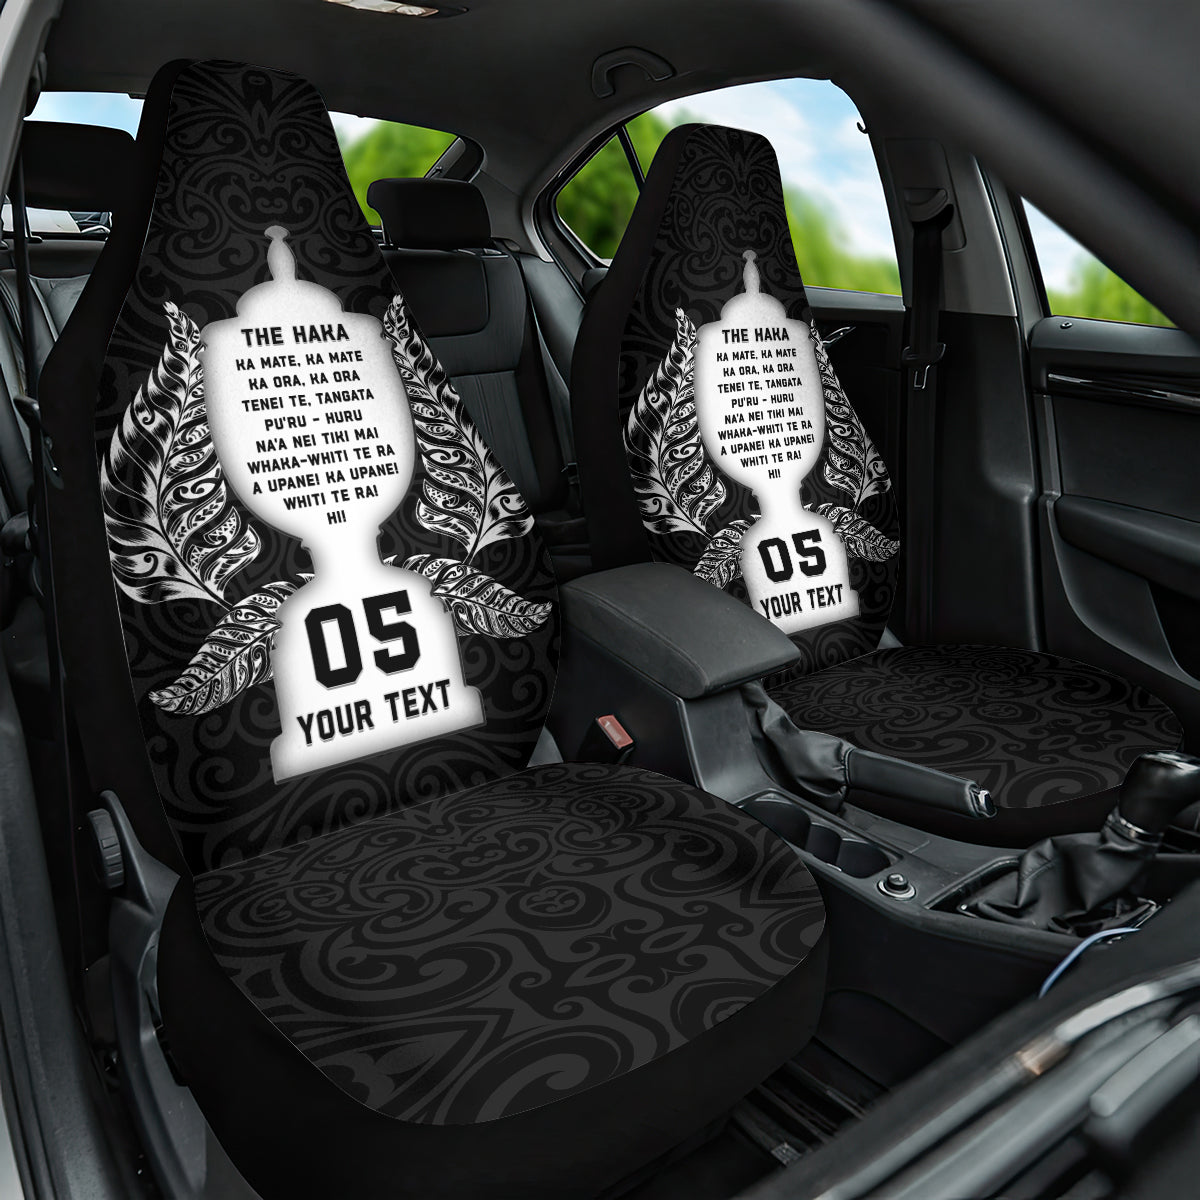 Custom New Zealand Rugby Car Seat Cover The Haka With Champions Cup LT05 One Size Black - Polynesian Pride